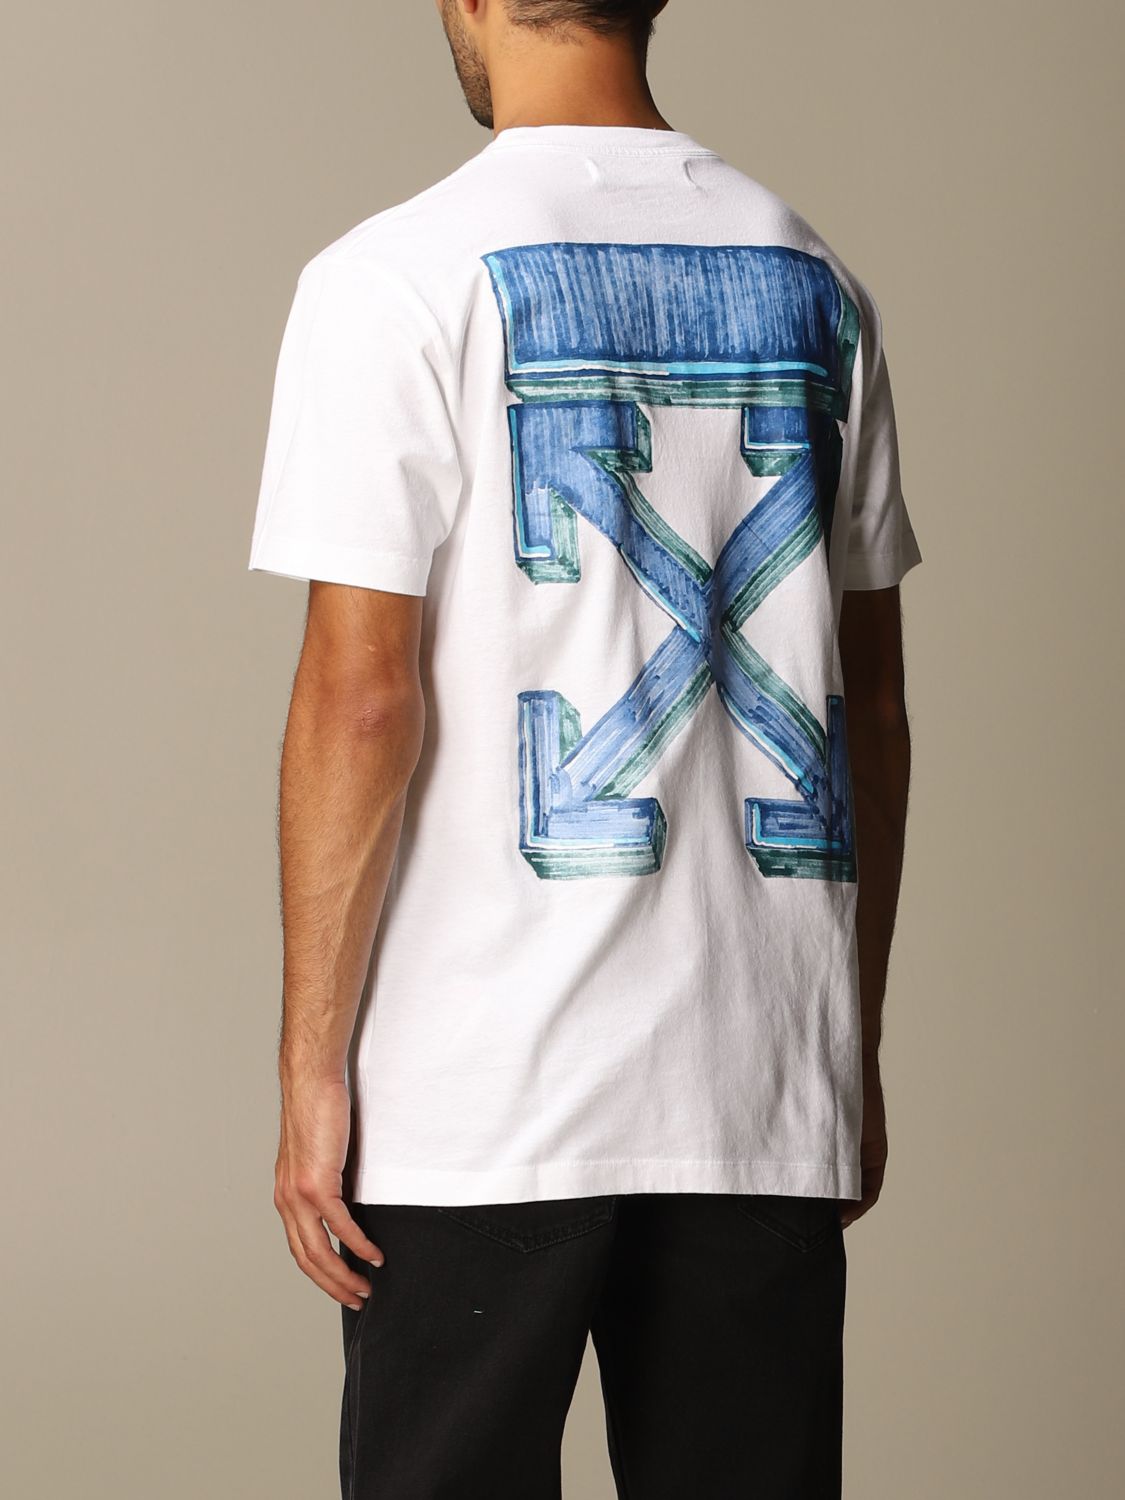 OFF WHITE: T-shirt with printed arrows | T-Shirt Off White Men White | T-Shirt Off White 